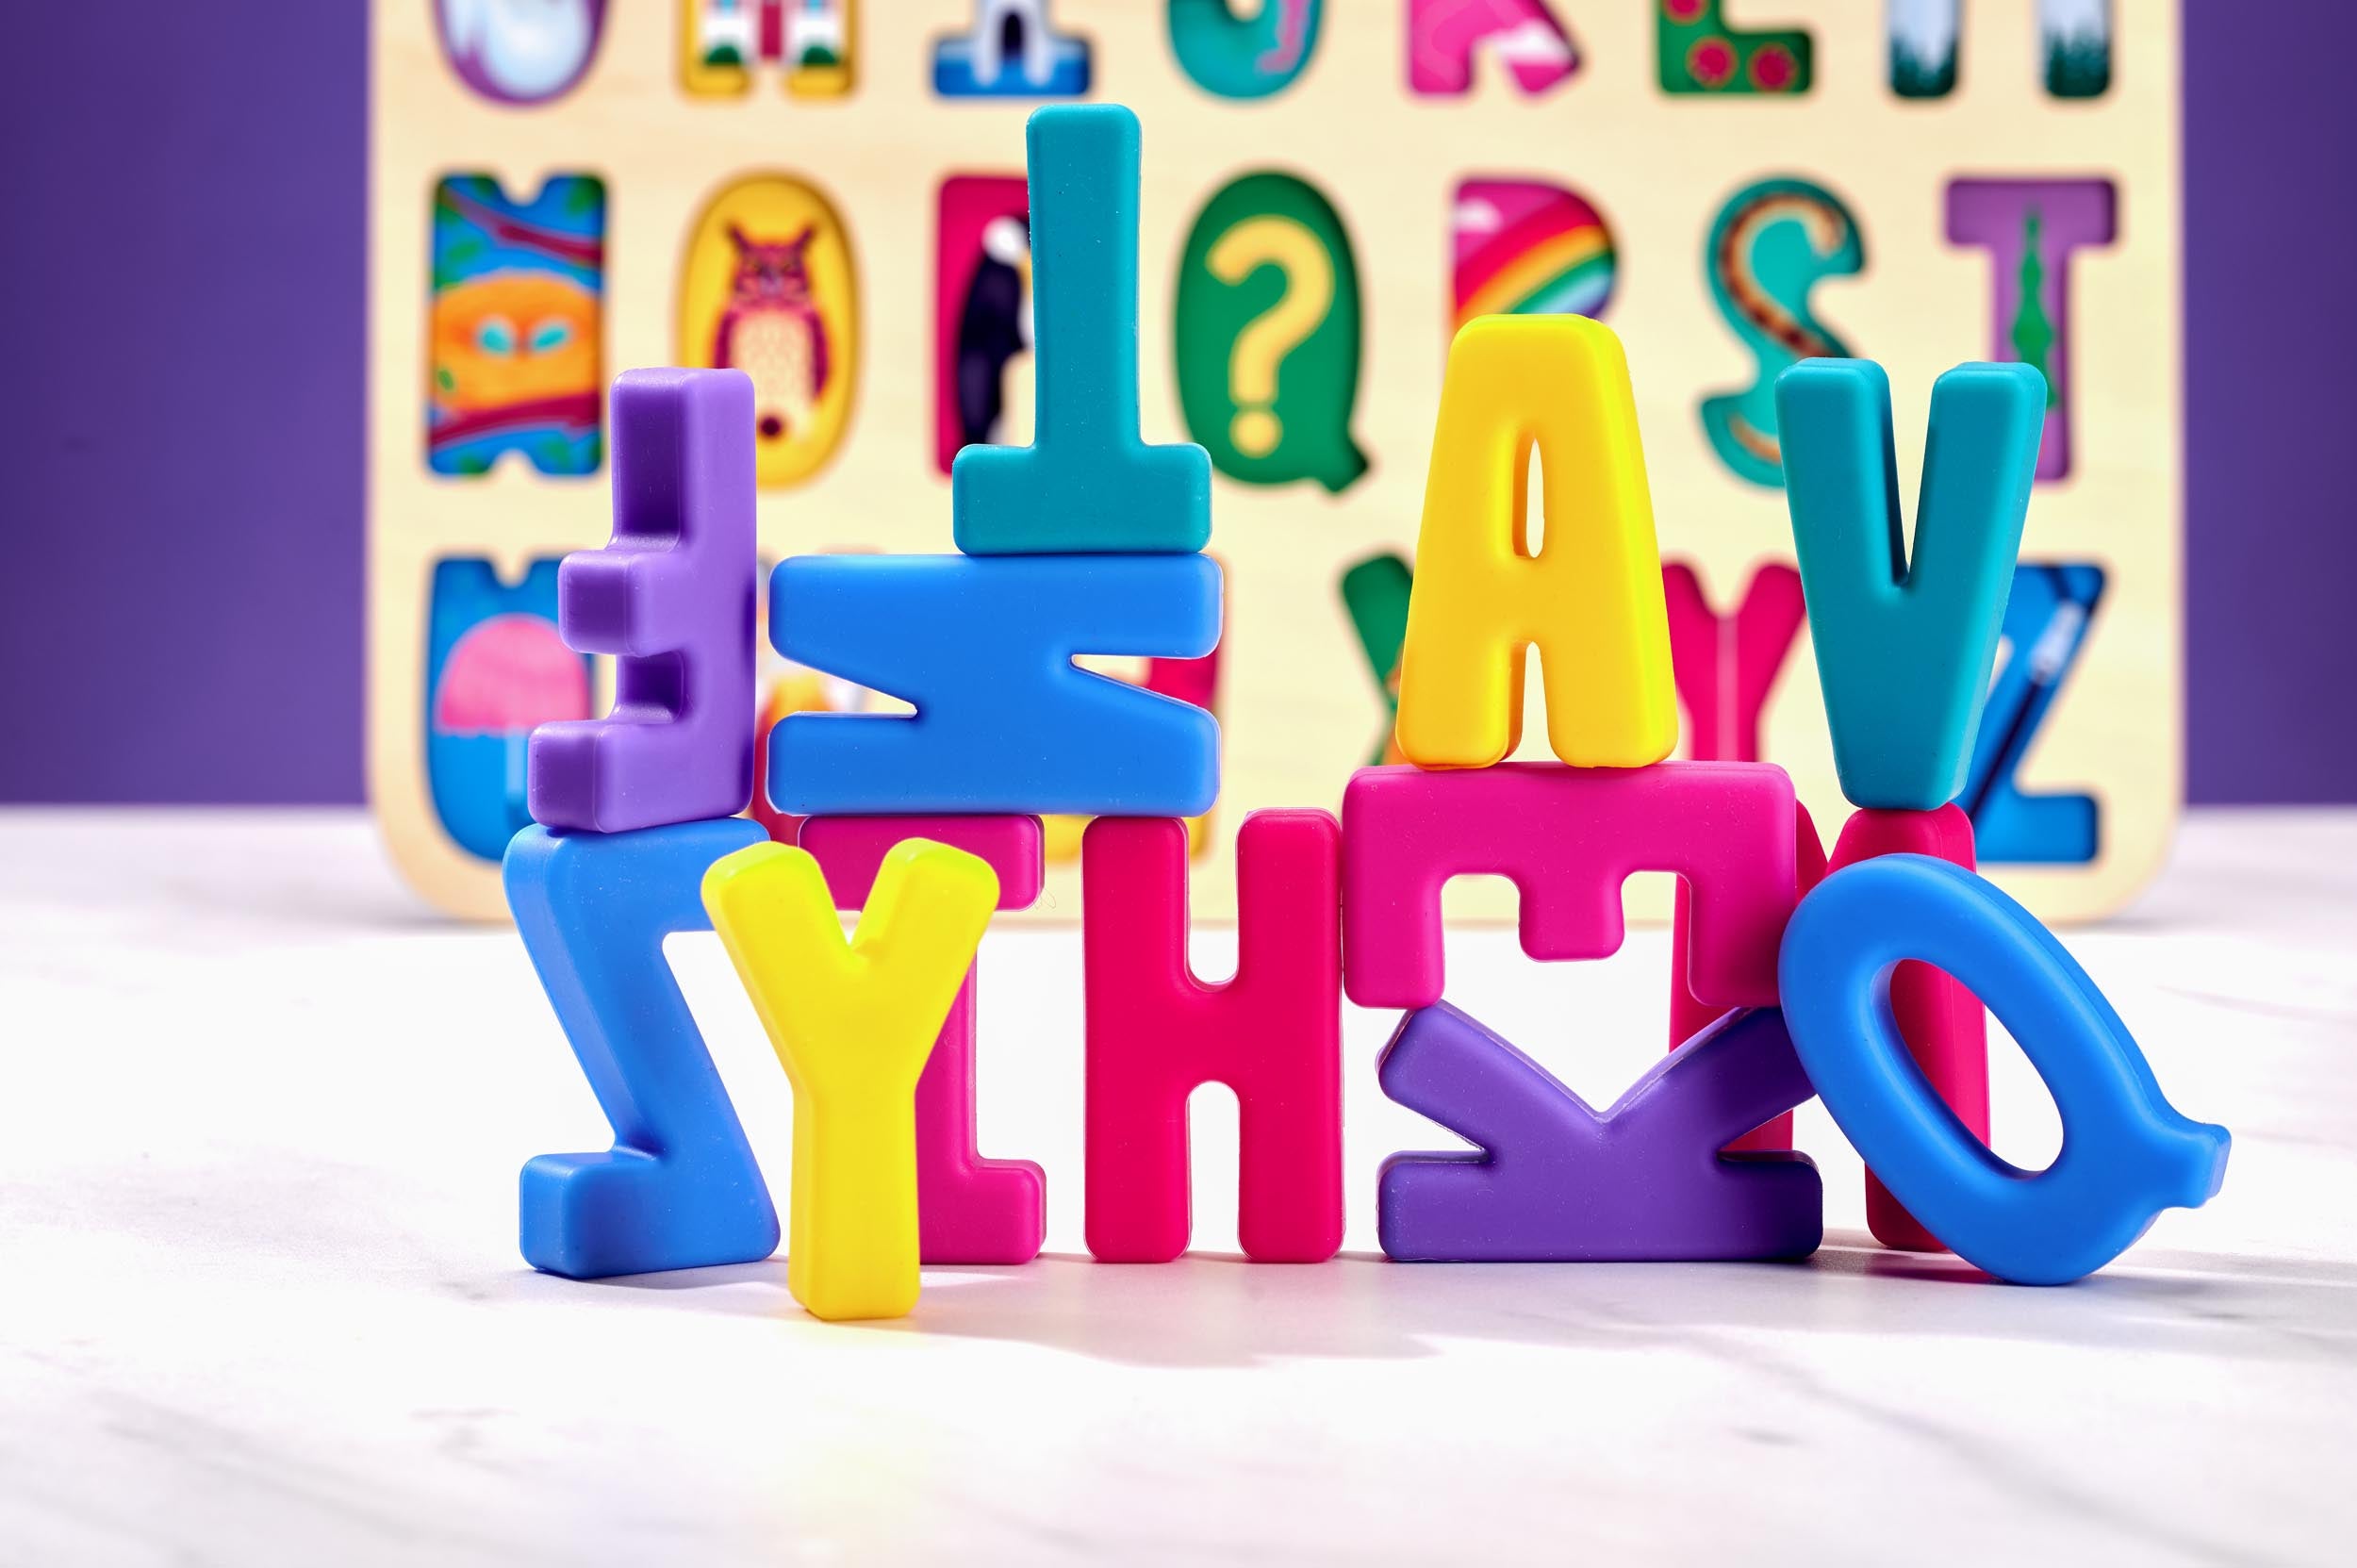 Wooden Alphabet Puzzle Board, ABC Find and Fit puzzle, large puzzle pieces for babies, silicone puzzle pieces, waterproof puzzle pieces, Puzzle for preschoolers, 2 year old puzzles, 3 year old puzzles, puzzles for classrooms and playrooms, ABC Puzzle Board, Alphabet Puzzle Board, Puzzle Board, Kids Puzzle Board, Toddler Puzzle Board, Kindergarten Puzzle Board, Puzzle for children with autism, Puzzle for Children with sensory needs